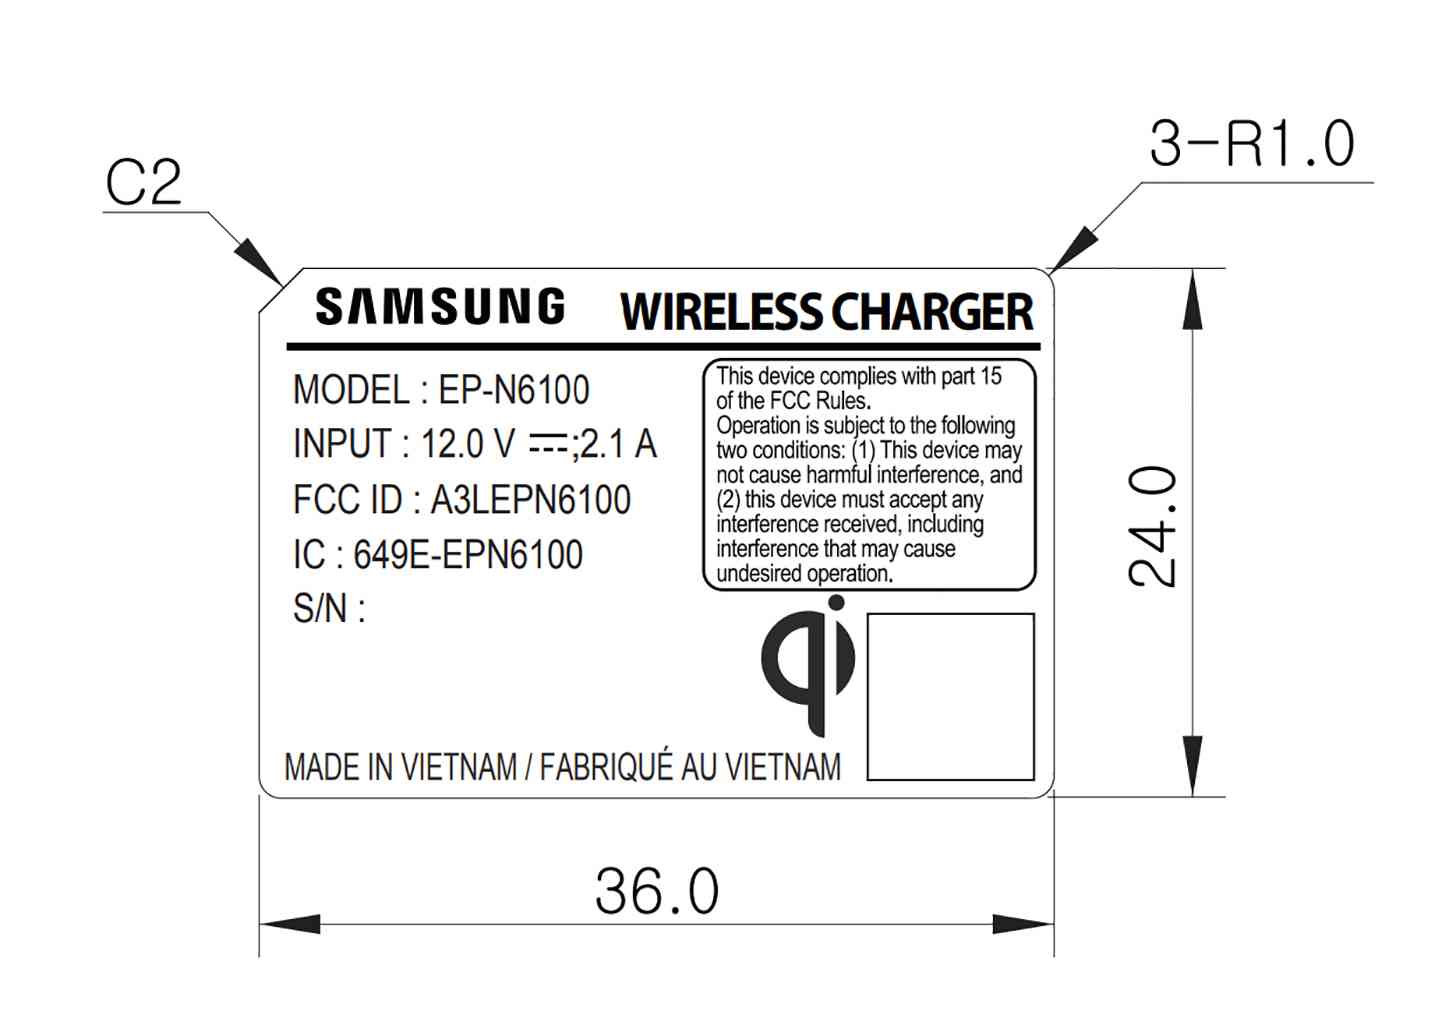 Samsung EP-N6100 wireless charger